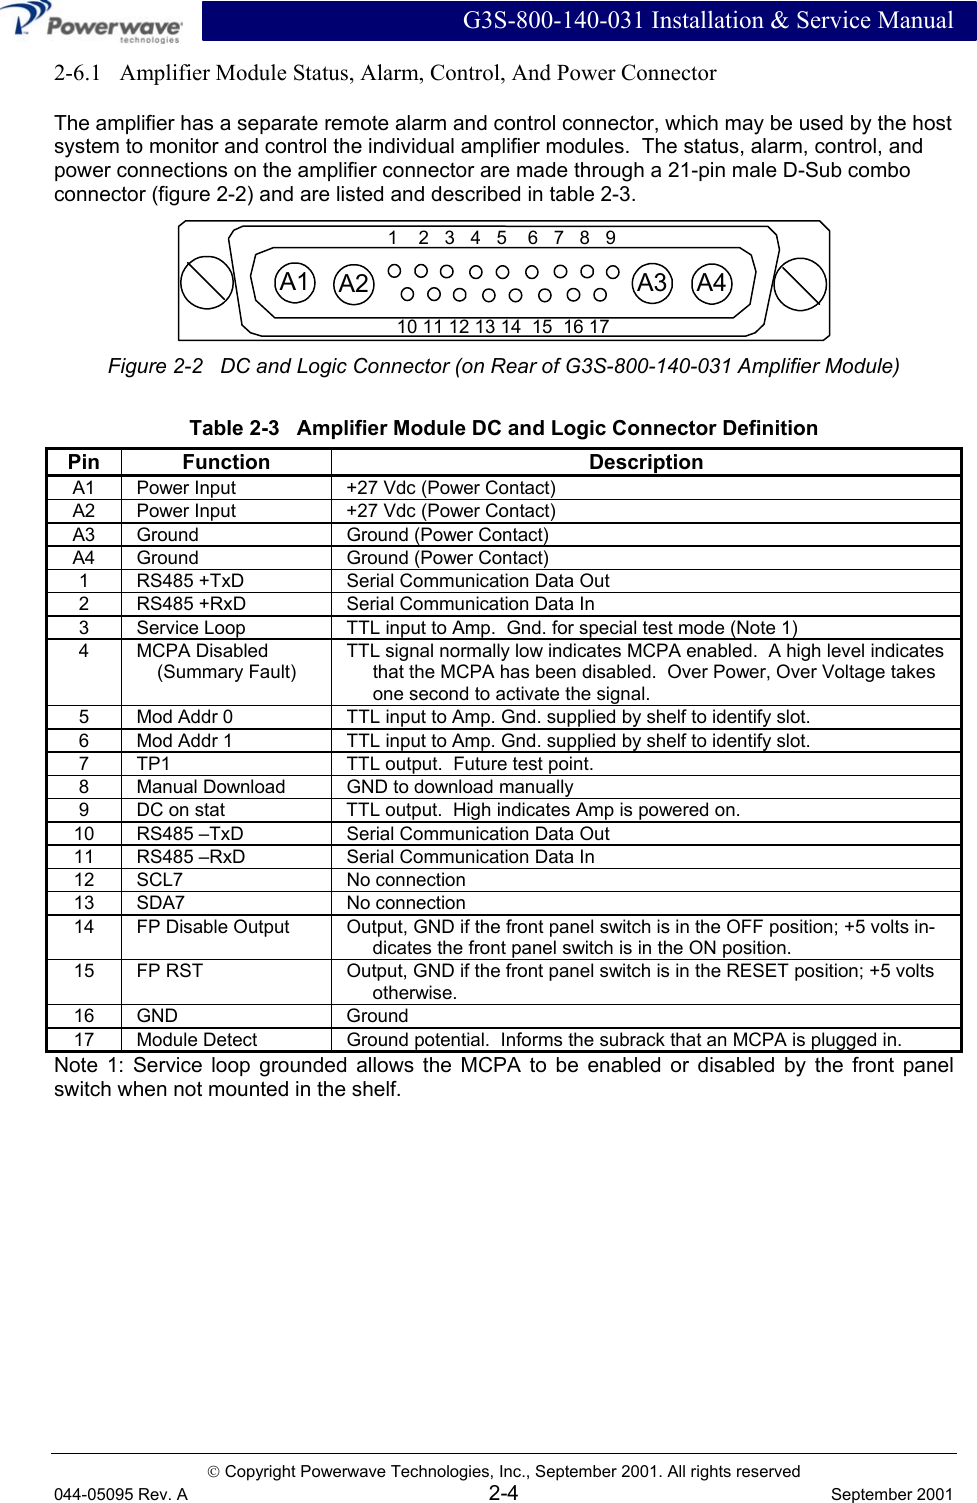  G3S-800-140-031 Installation &amp; Service Manual  Copyright Powerwave Technologies, Inc., September 2001. All rights reserved 044-05095 Rev. A 2-4  September 2001 2-6.1   Amplifier Module Status, Alarm, Control, And Power Connector The amplifier has a separate remote alarm and control connector, which may be used by the host system to monitor and control the individual amplifier modules.  The status, alarm, control, and power connections on the amplifier connector are made through a 21-pin male D-Sub combo connector (figure 2-2) and are listed and described in table 2-3. A1 A2 A3 A41    2   3   4   5    6   7   8   910 11 12 13 14  15  16 17  Figure 2-2   DC and Logic Connector (on Rear of G3S-800-140-031 Amplifier Module) Table 2-3   Amplifier Module DC and Logic Connector Definition Pin   Function  Description A1  Power Input  +27 Vdc (Power Contact) A2  Power Input  +27 Vdc (Power Contact) A3  Ground  Ground (Power Contact) A4  Ground  Ground (Power Contact) 1  RS485 +TxD  Serial Communication Data Out 2  RS485 +RxD  Serial Communication Data In 3  Service Loop  TTL input to Amp.  Gnd. for special test mode (Note 1) 4 MCPA Disabled (Summary Fault) TTL signal normally low indicates MCPA enabled.  A high level indicates that the MCPA has been disabled.  Over Power, Over Voltage takes one second to activate the signal. 5  Mod Addr 0  TTL input to Amp. Gnd. supplied by shelf to identify slot. 6  Mod Addr 1  TTL input to Amp. Gnd. supplied by shelf to identify slot. 7  TP1  TTL output.  Future test point. 8  Manual Download  GND to download manually 9  DC on stat  TTL output.  High indicates Amp is powered on. 10  RS485 –TxD  Serial Communication Data Out 11  RS485 –RxD  Serial Communication Data In 12 SCL7  No connection 13 SDA7  No connection 14  FP Disable Output  Output, GND if the front panel switch is in the OFF position; +5 volts in-dicates the front panel switch is in the ON position. 15  FP RST  Output, GND if the front panel switch is in the RESET position; +5 volts otherwise. 16 GND  Ground 17  Module Detect  Ground potential.  Informs the subrack that an MCPA is plugged in. Note 1: Service loop grounded allows the MCPA to be enabled or disabled by the front panel switch when not mounted in the shelf. 